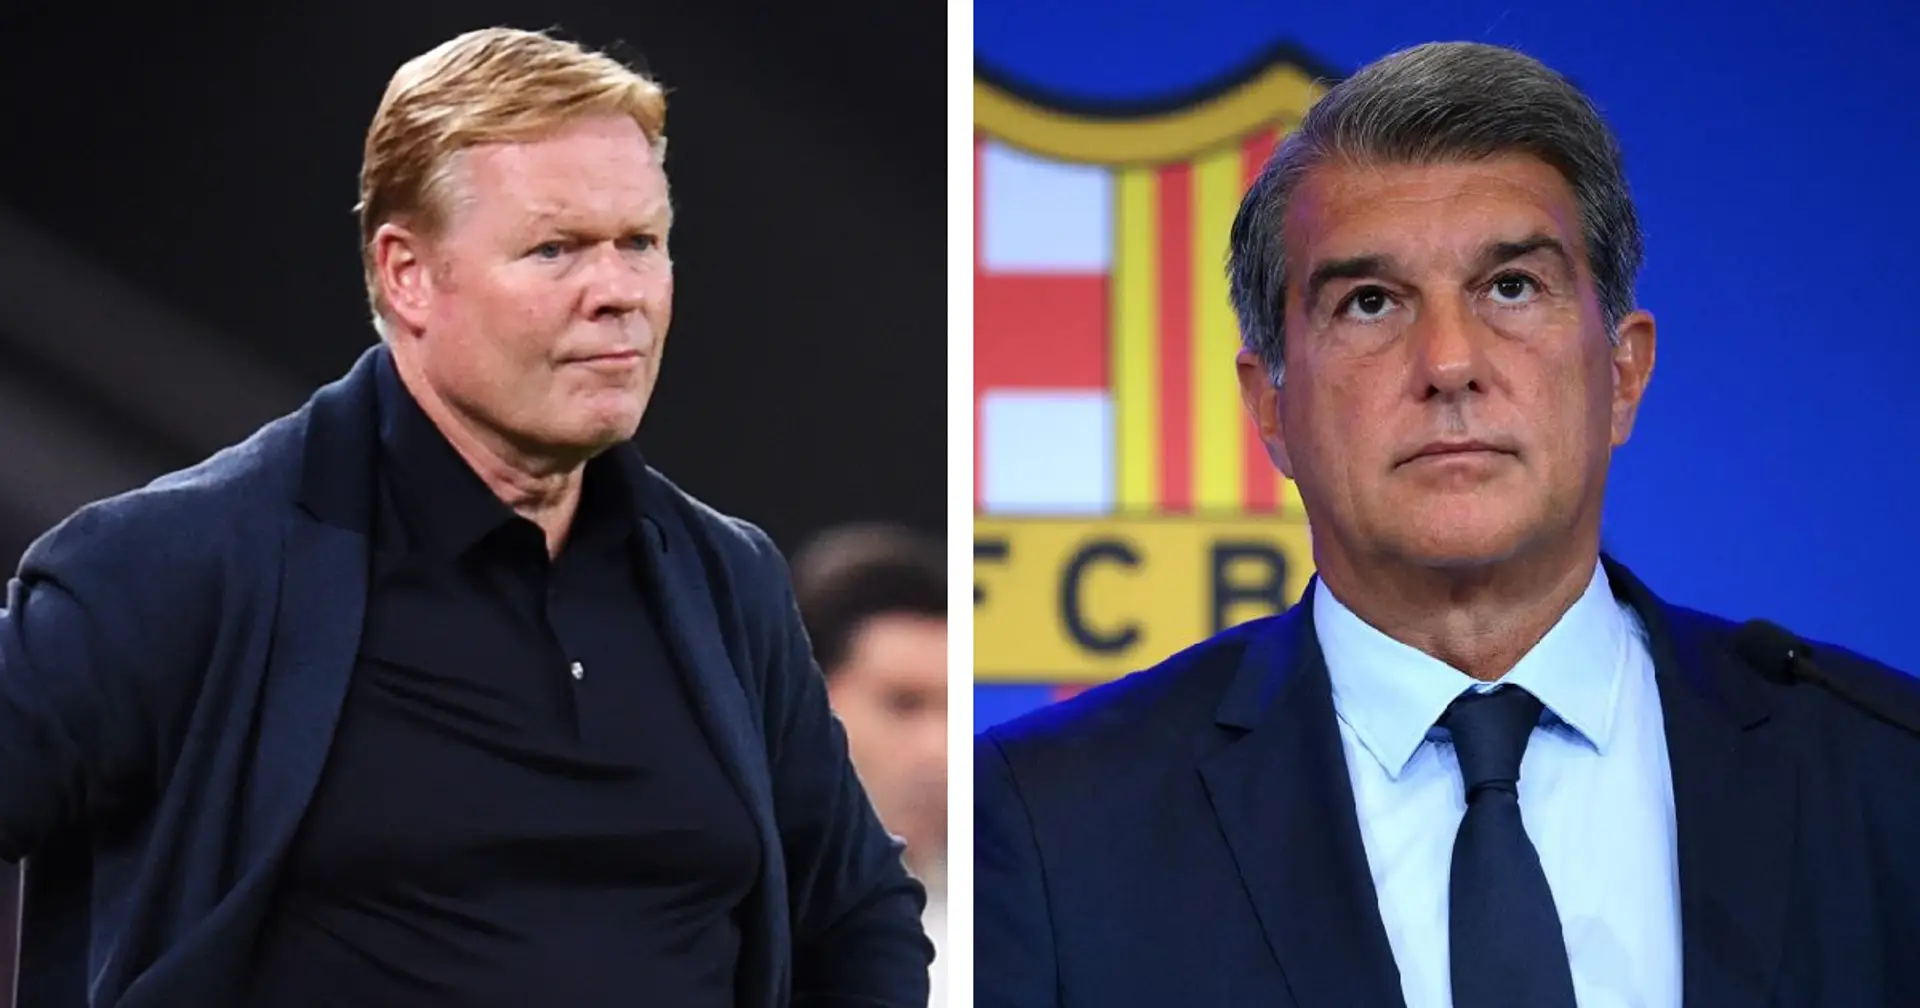 Revealed: 2 managers who turned down Barca job out of respect for Koeman